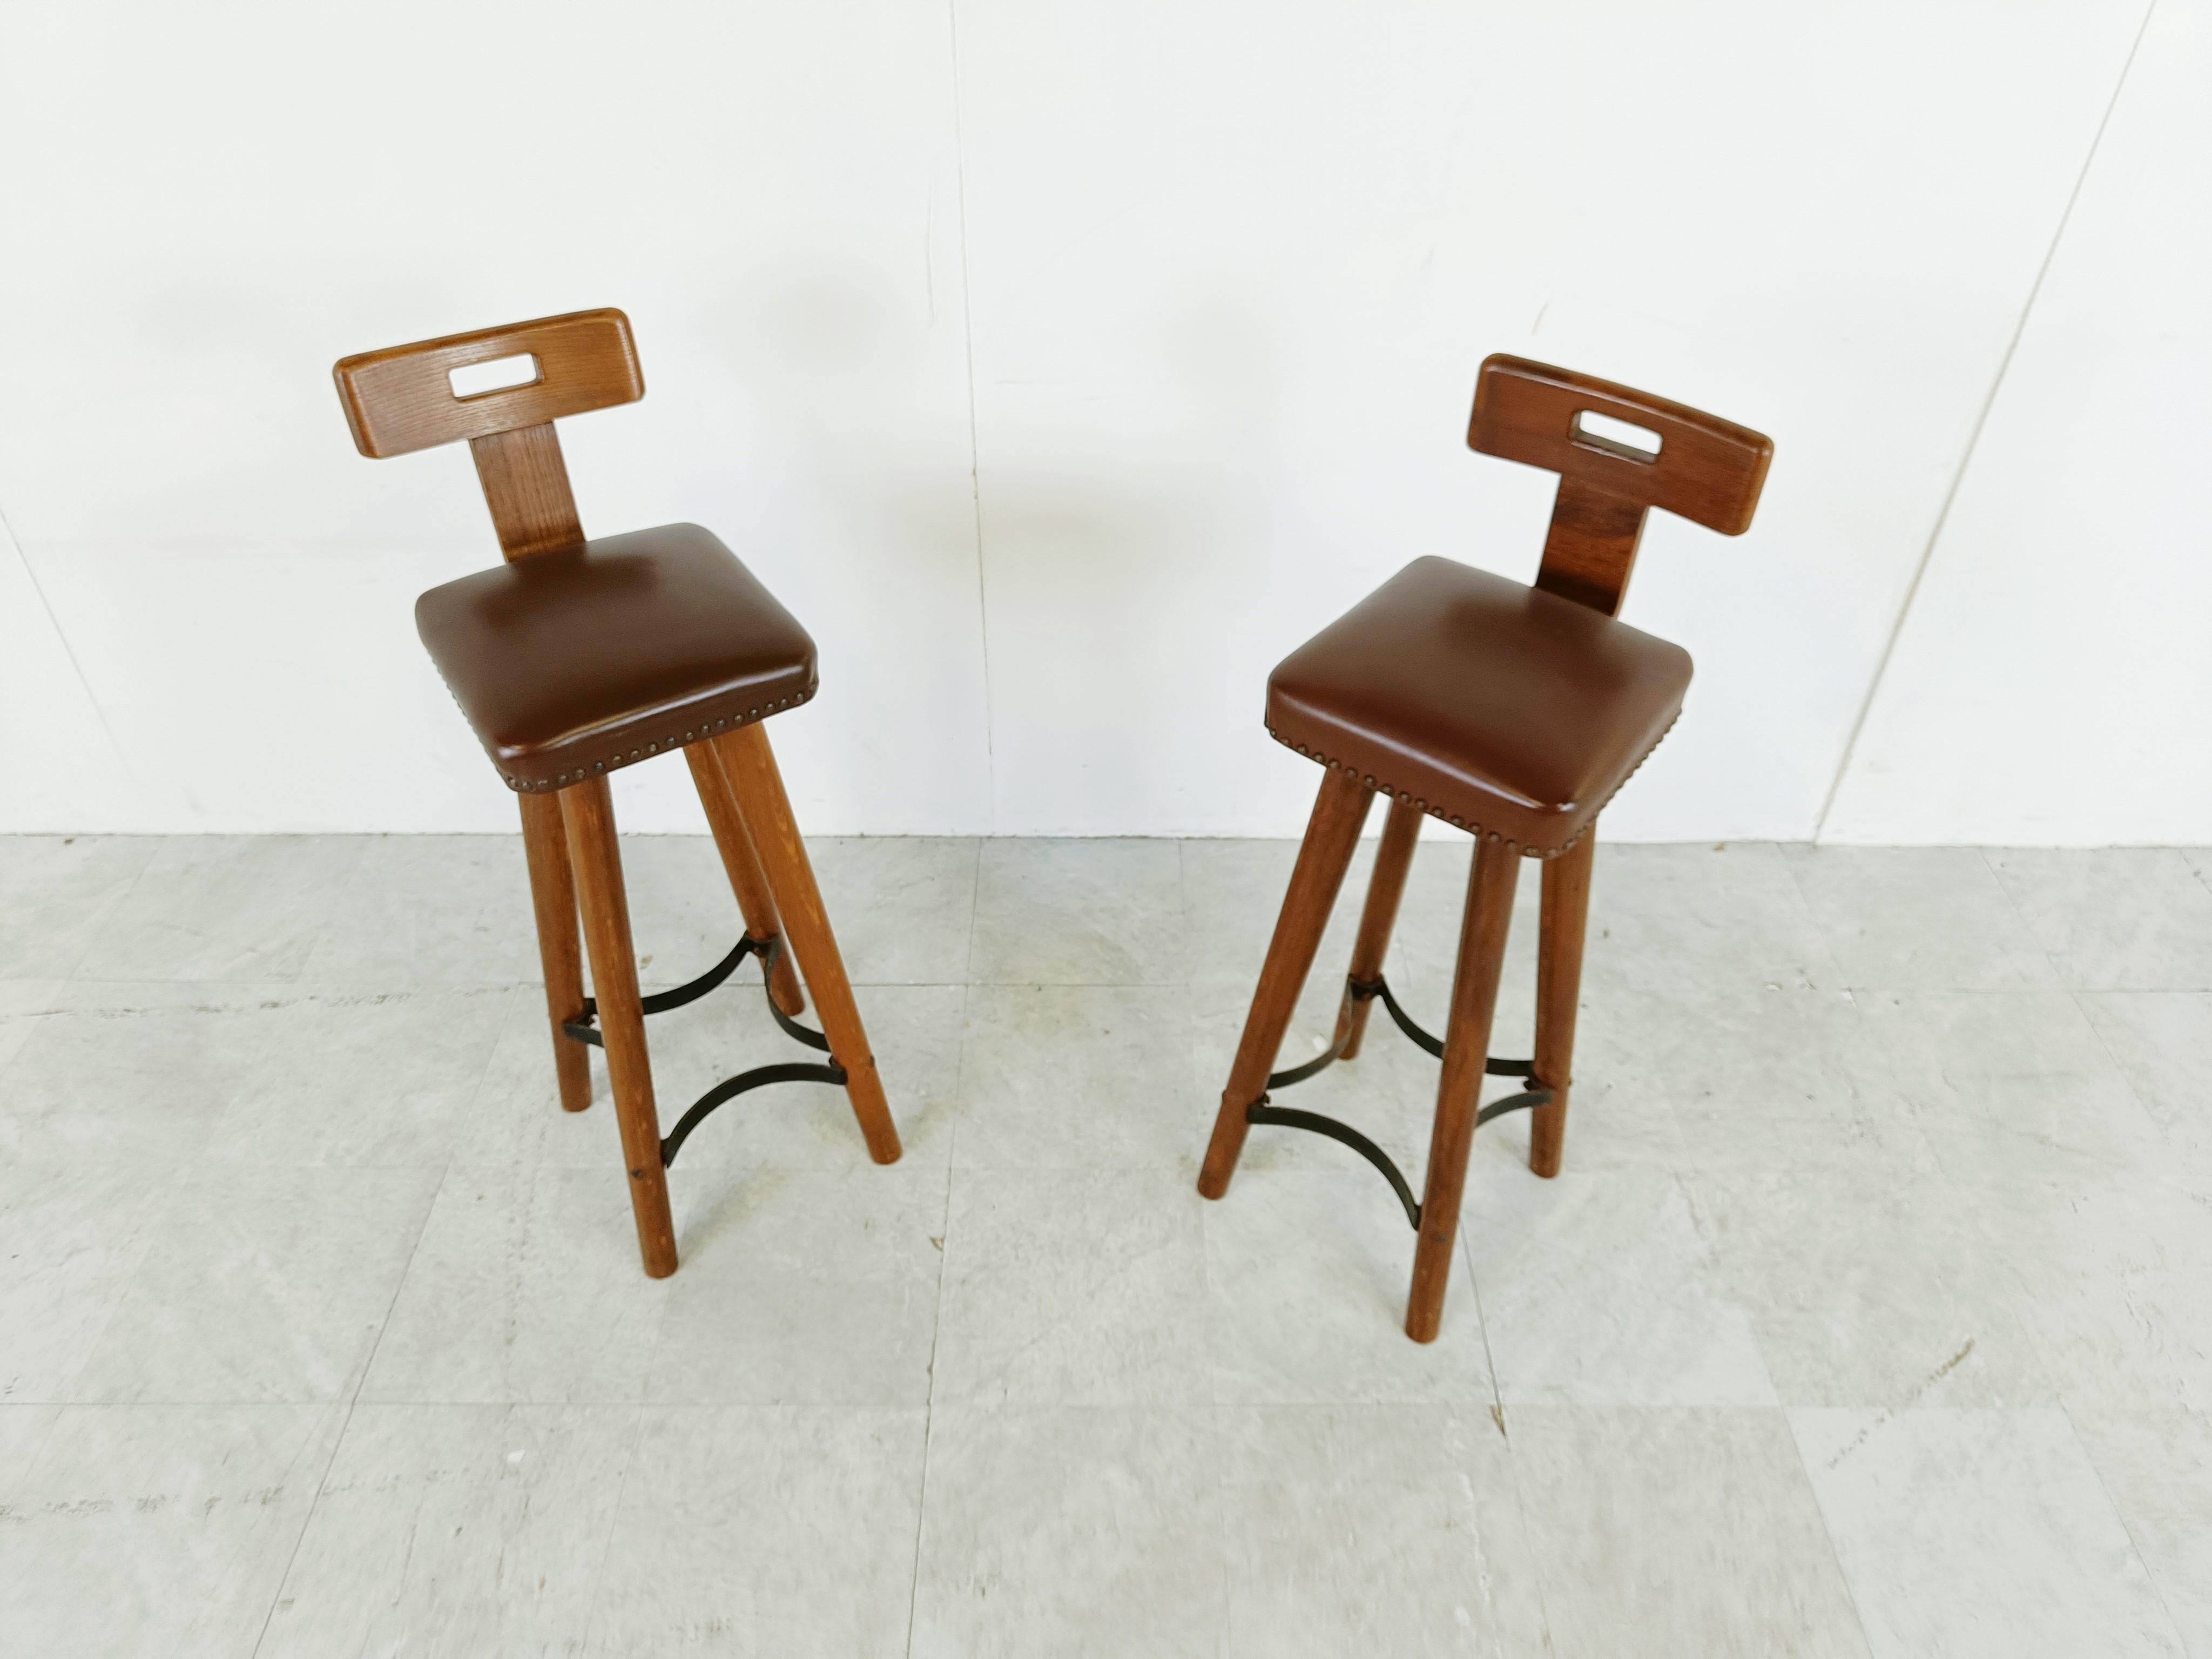 Mid century brutalist bar stools with elegant backrests and leatherette seats.

Metal footrests.

1960s - Belgium

Dimensions:
Width: 30cm/11.81